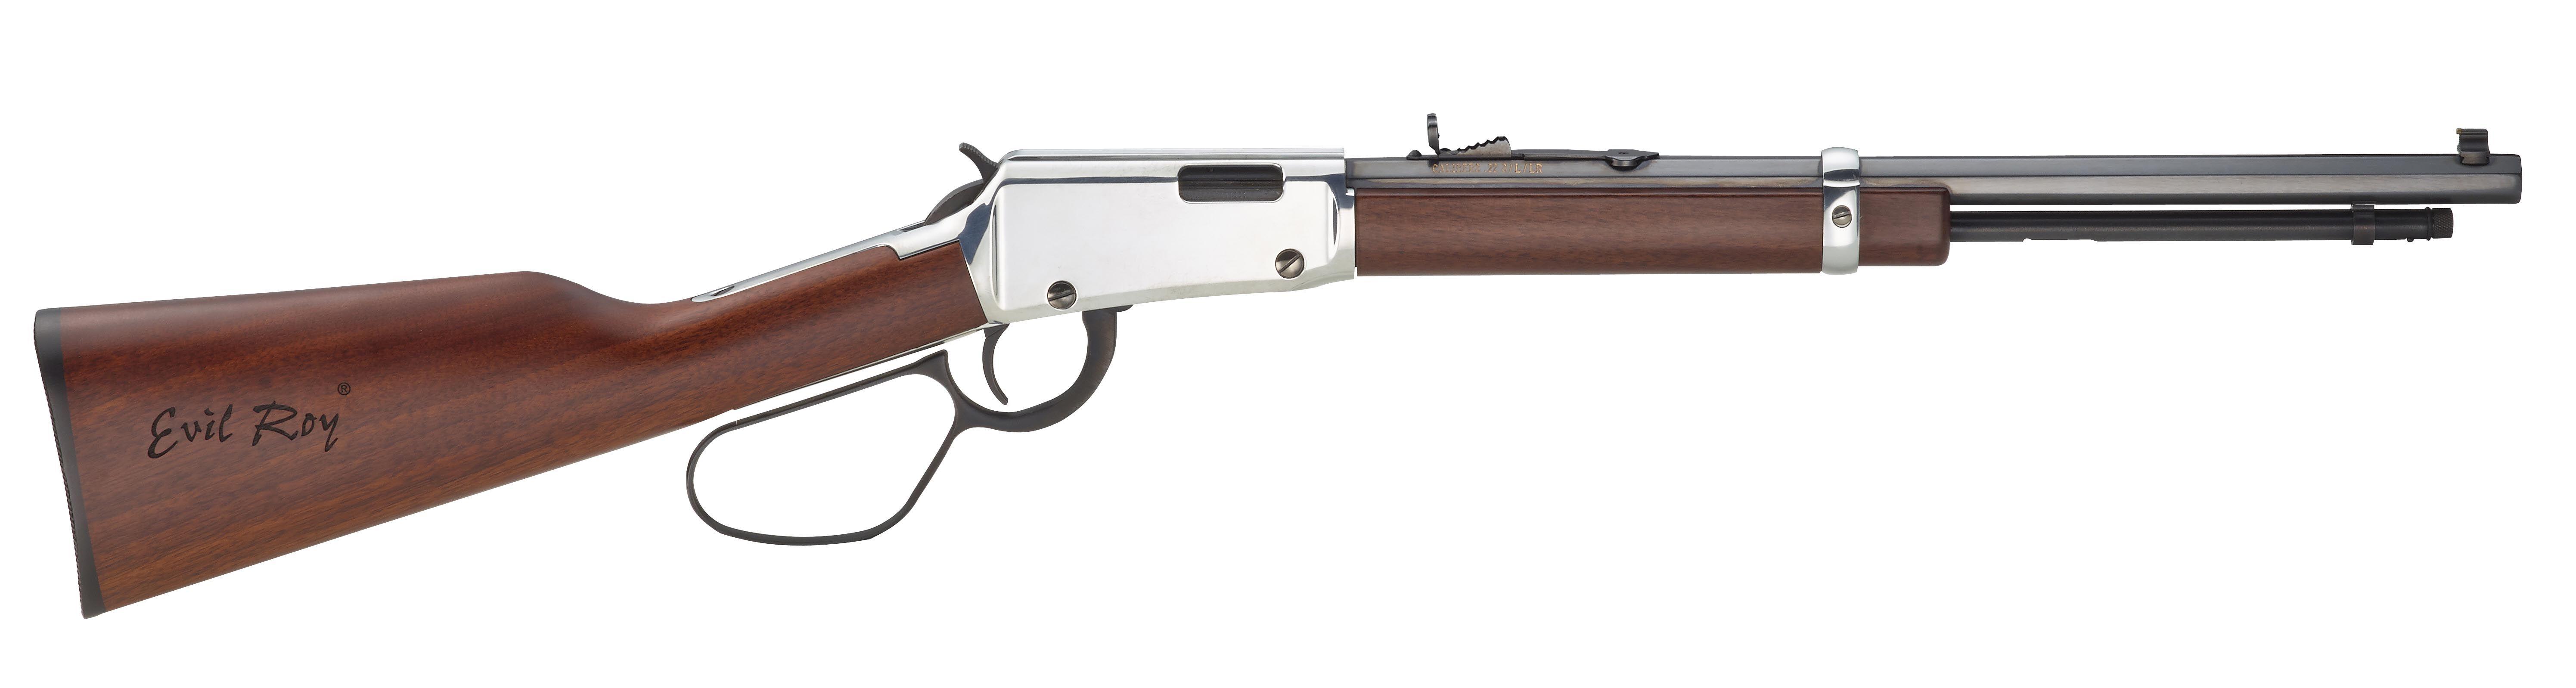 Henry Repeating Arms Logo - Personally Signed Henry Repeating Arms Frontier Carbine “Evil Roy